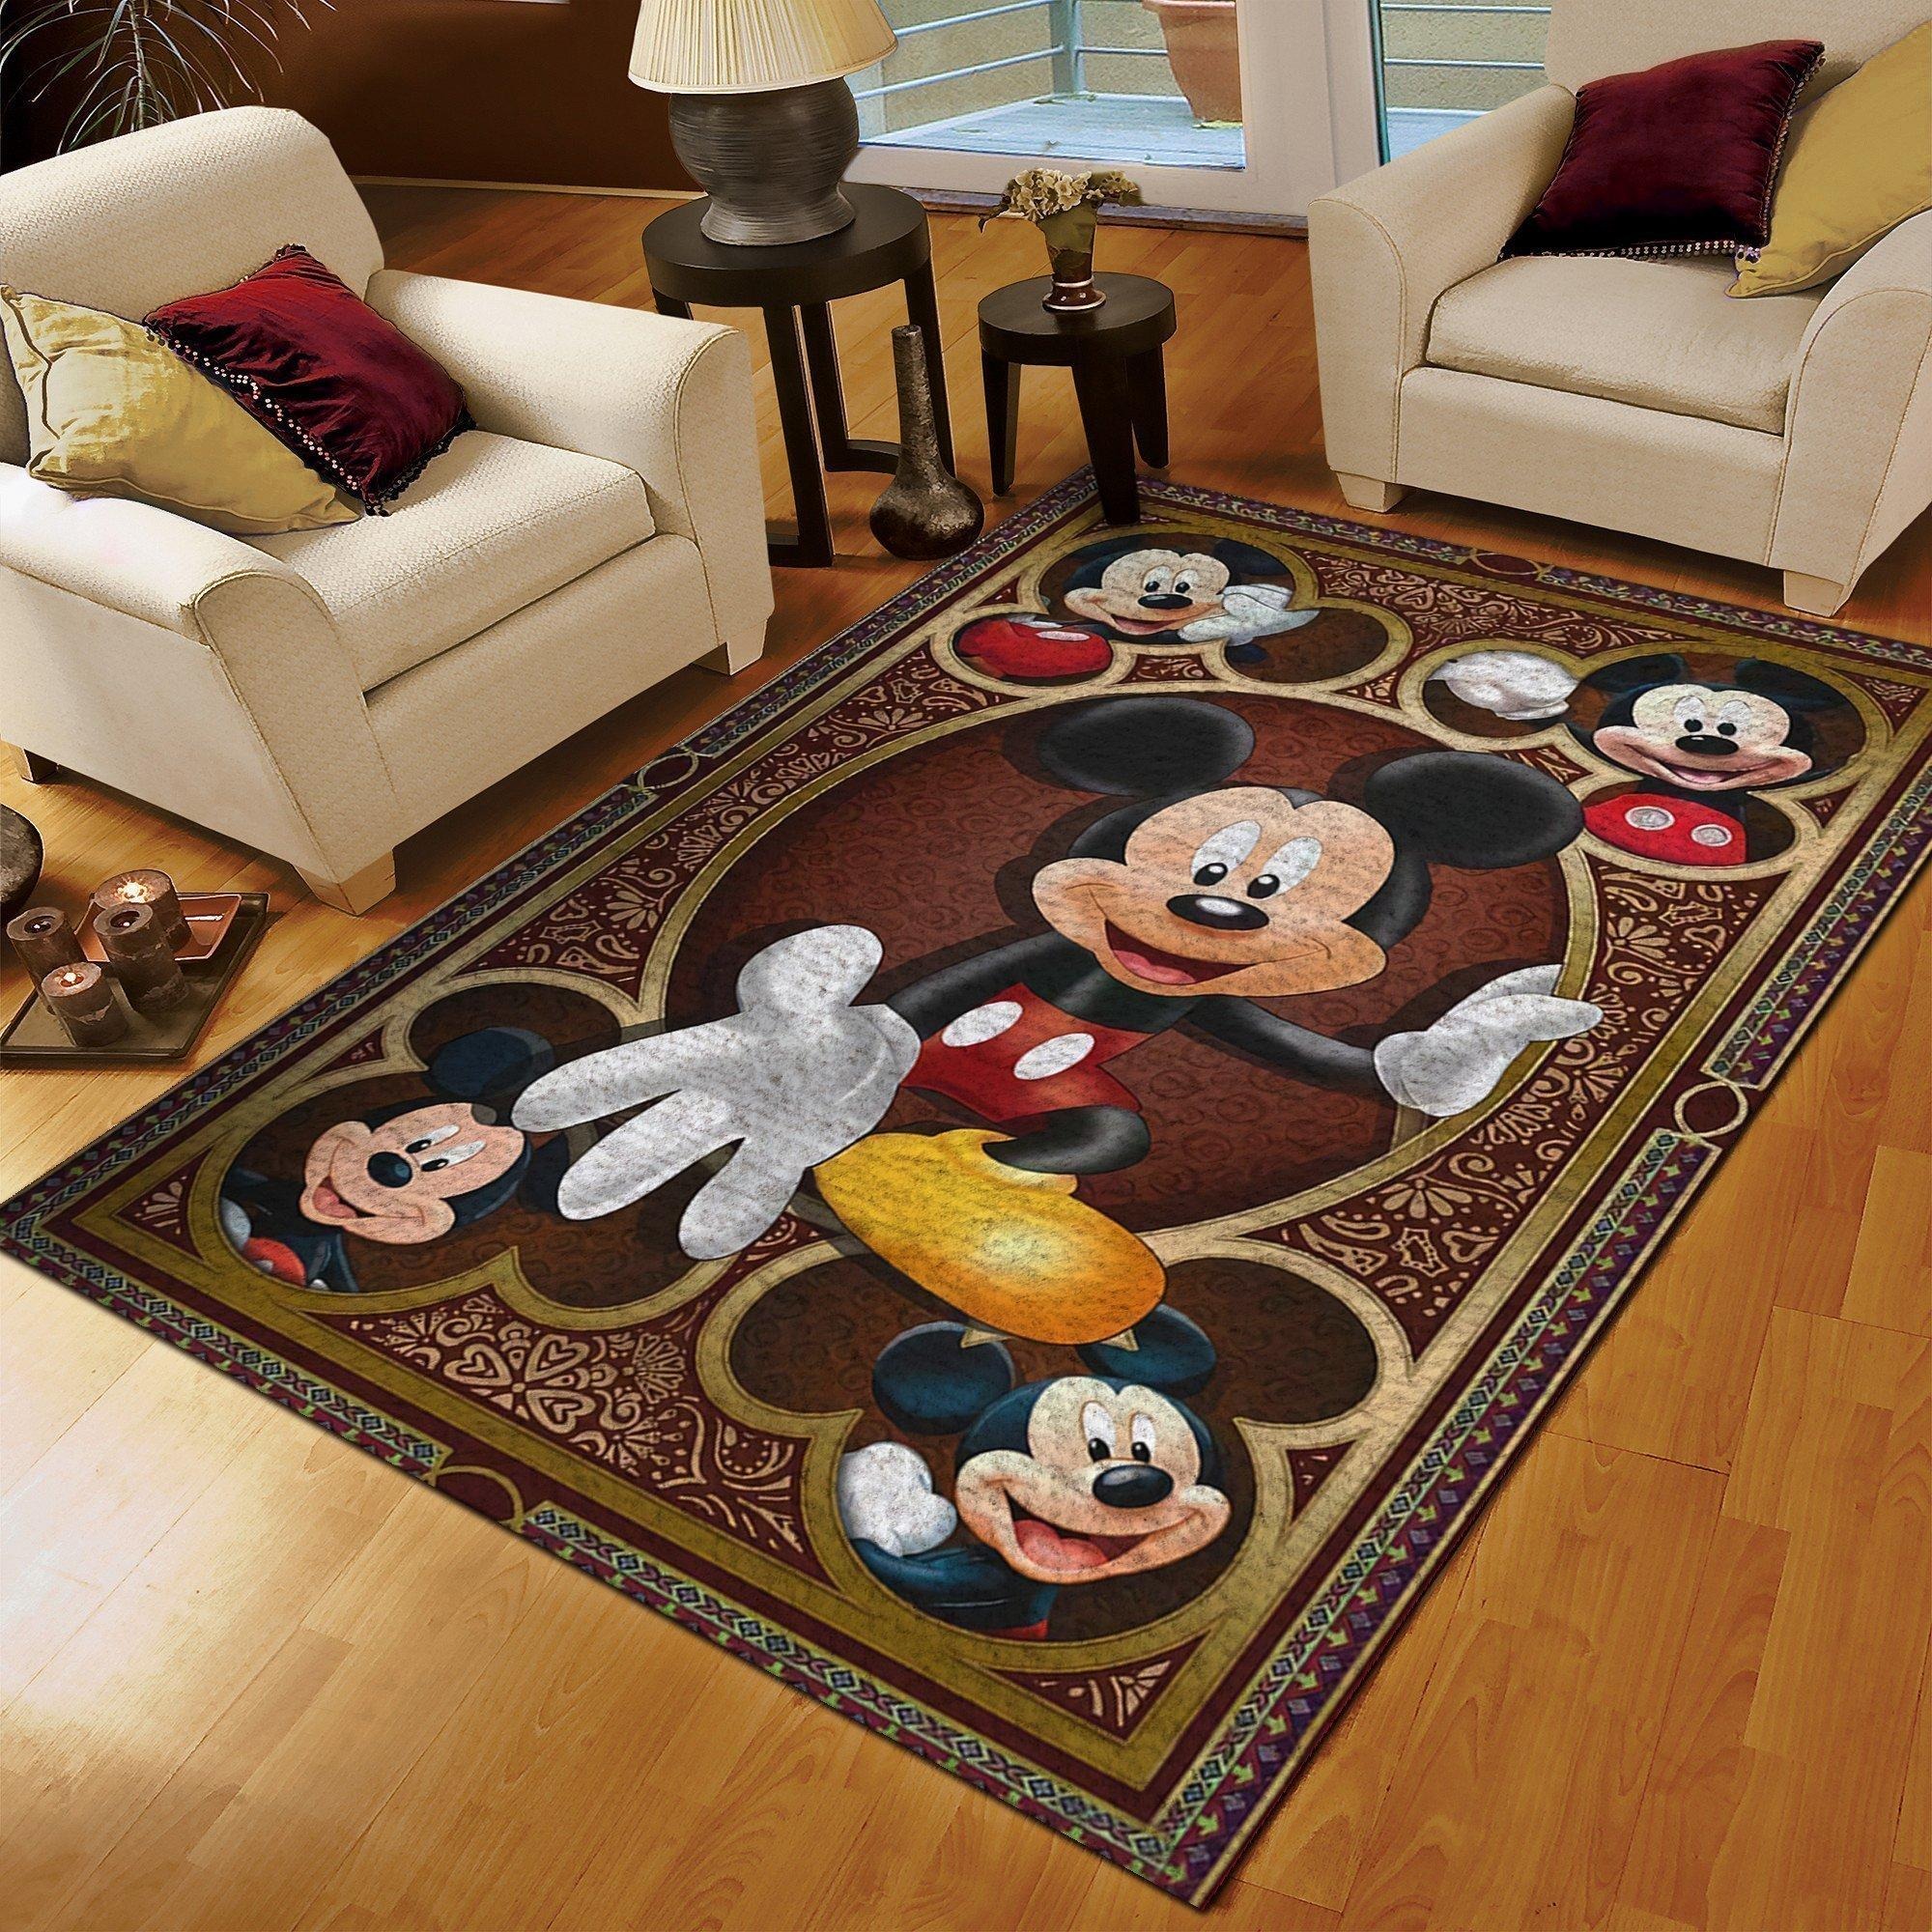 Mickey Mouse rugs